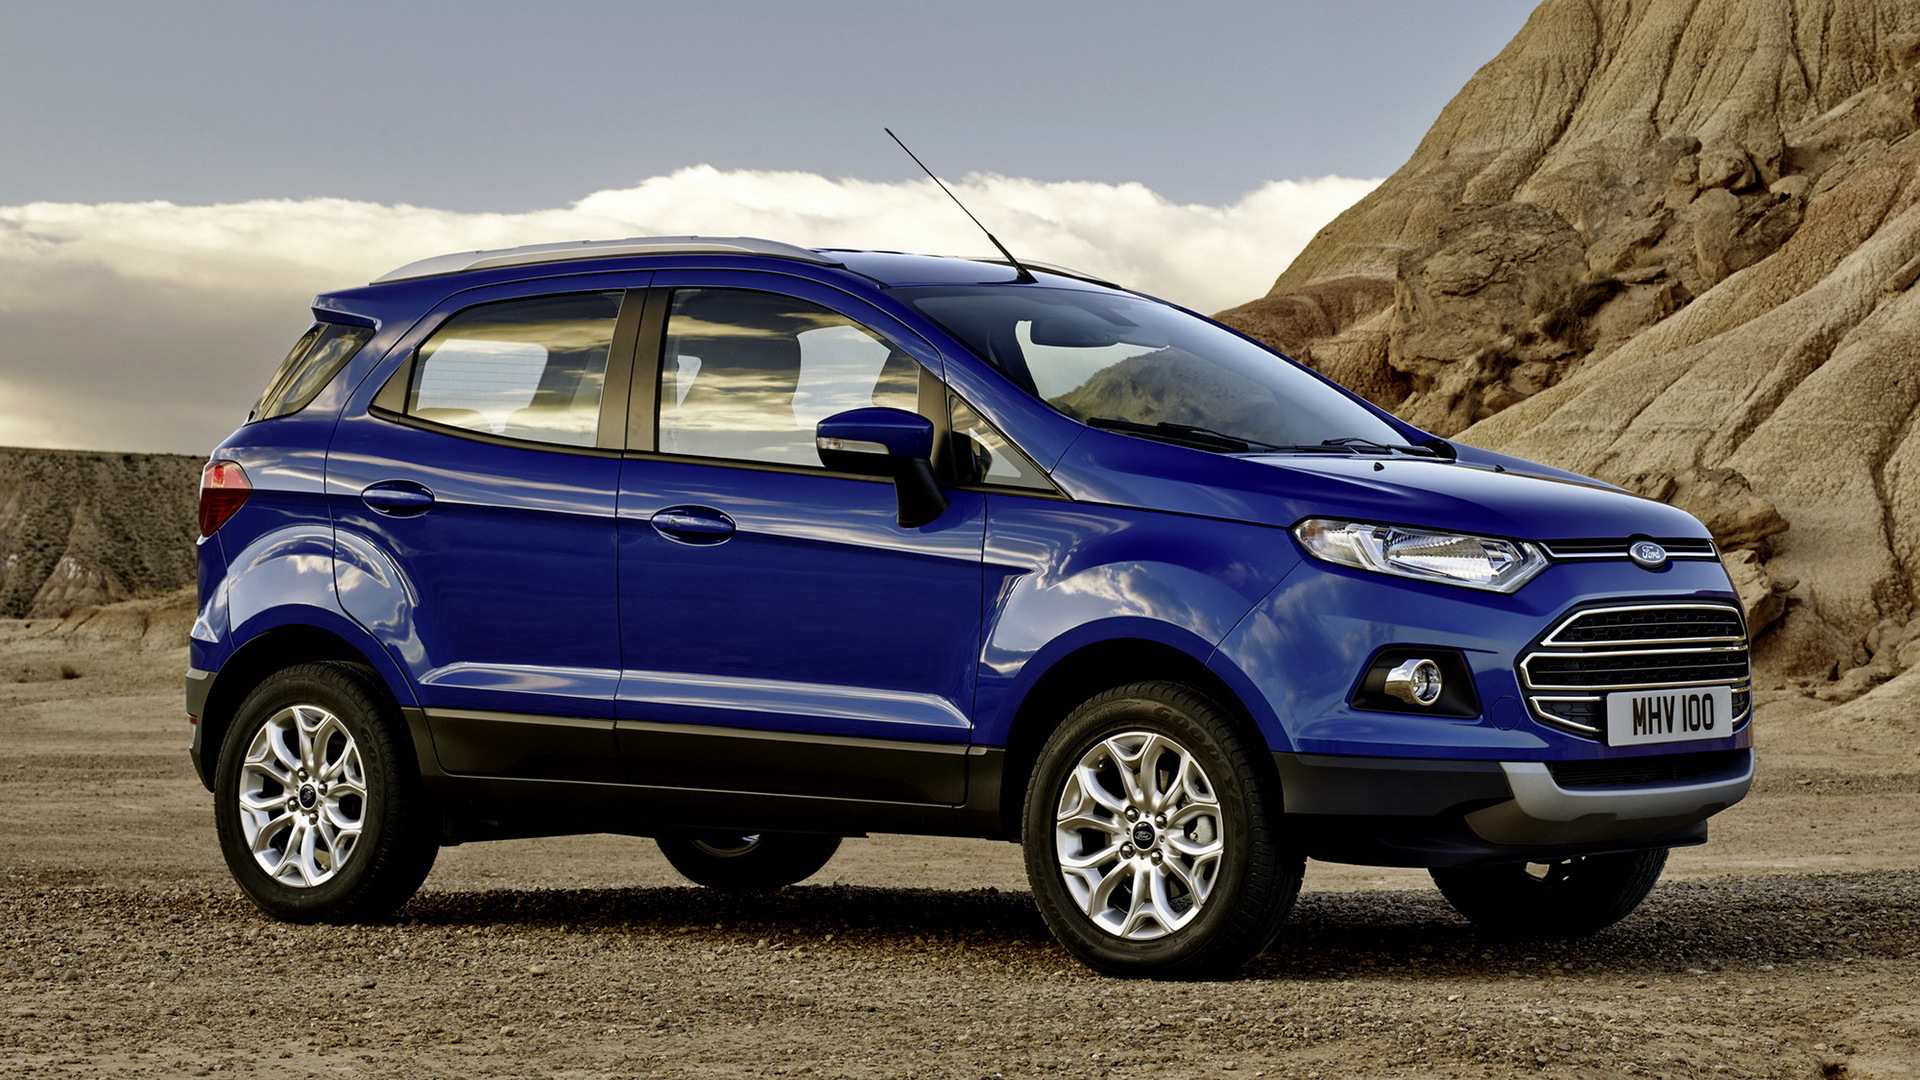 Lock Screen PC Wallpaper vehicles, ford ecosport, car, crossover car, subcompact car, suv, ford